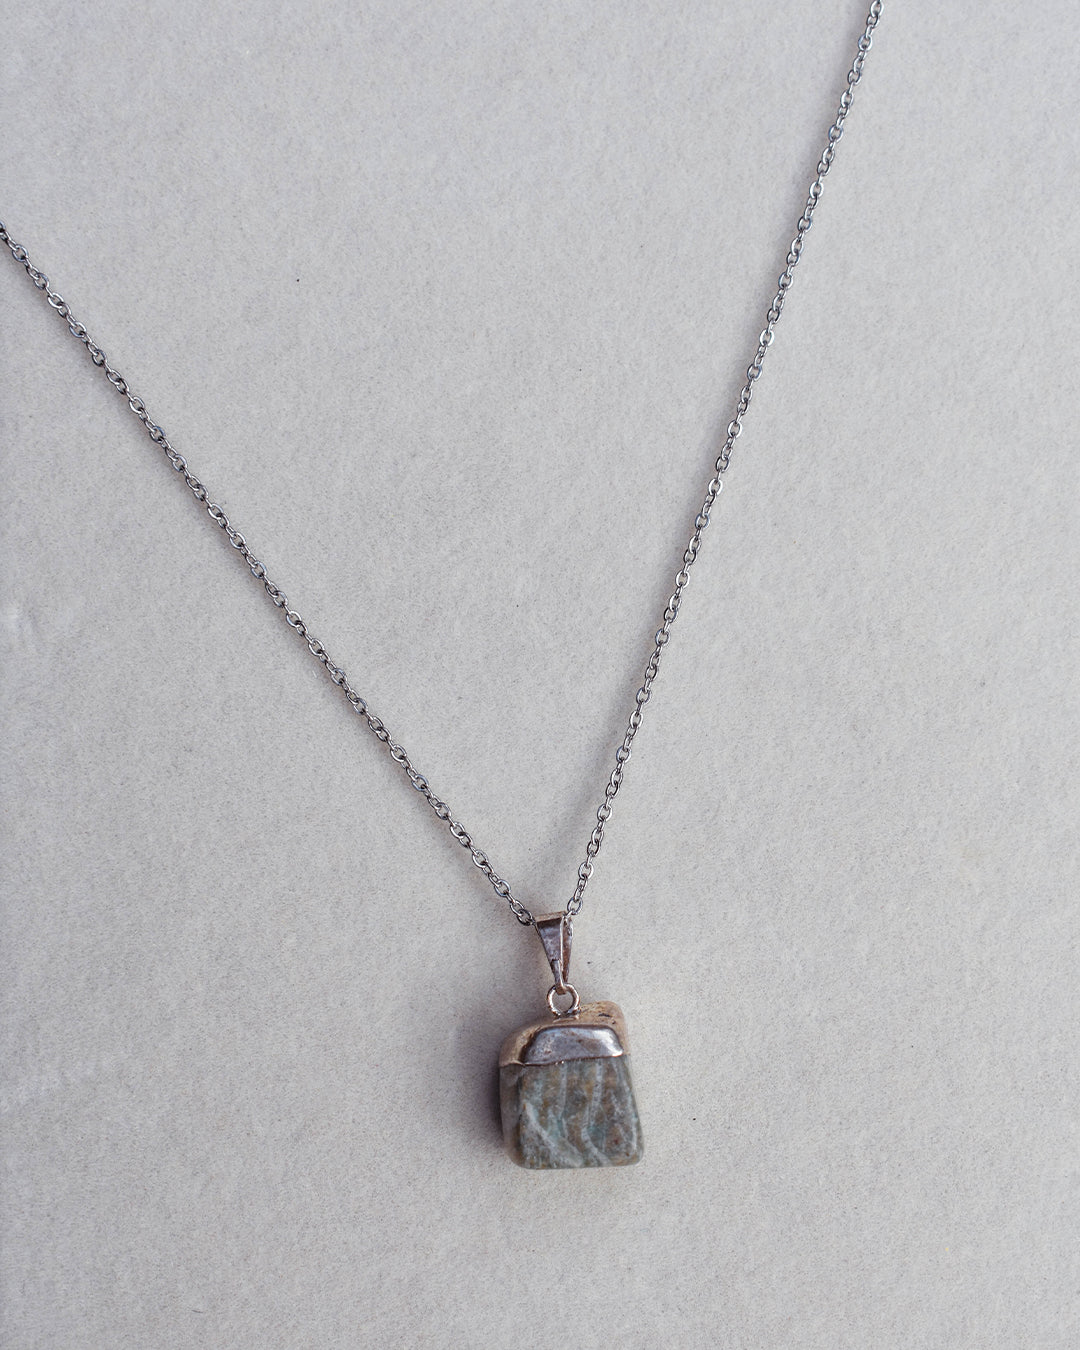 Stainless Steel chain with Amazonite crystal pendant